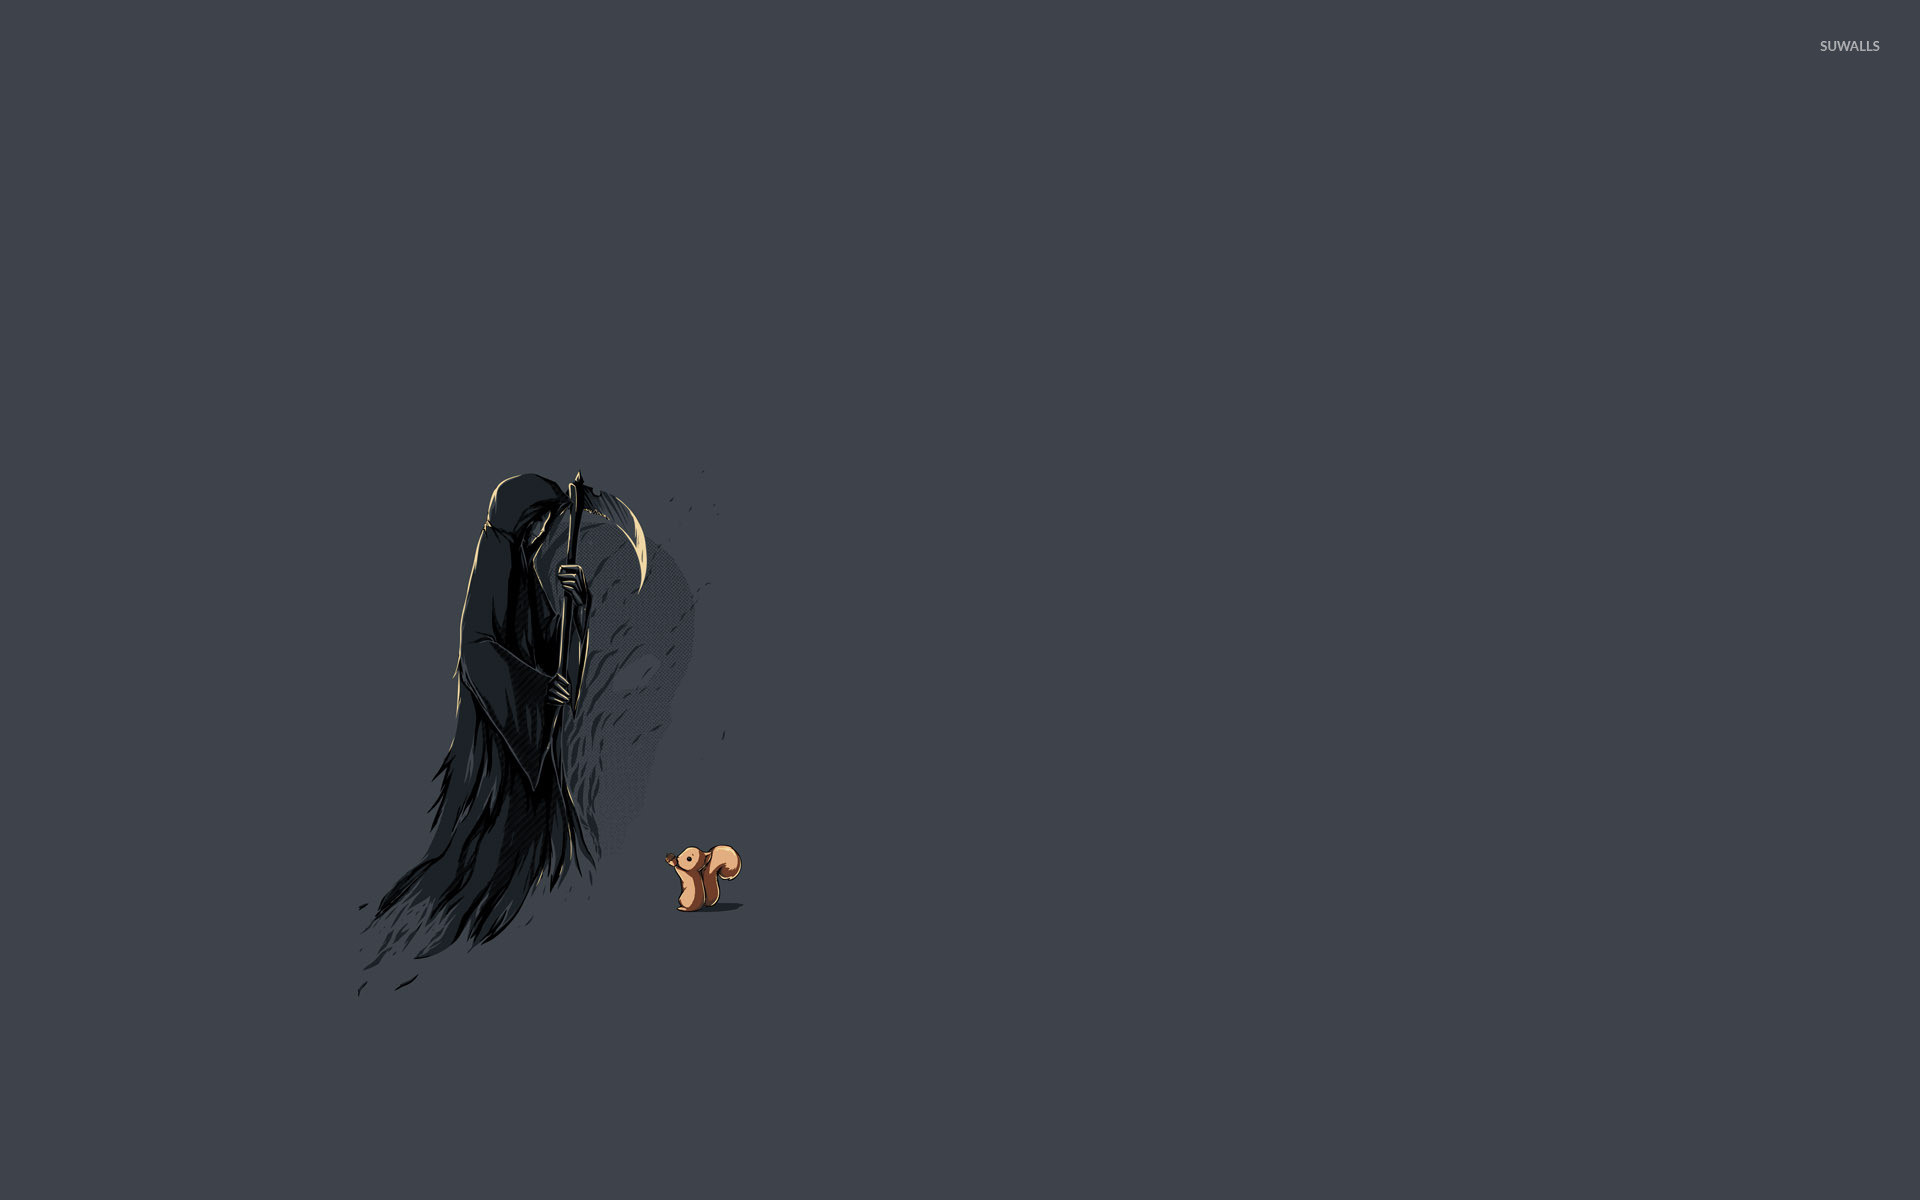 1920x1200 Squirrel and the grim reaper wallpaper